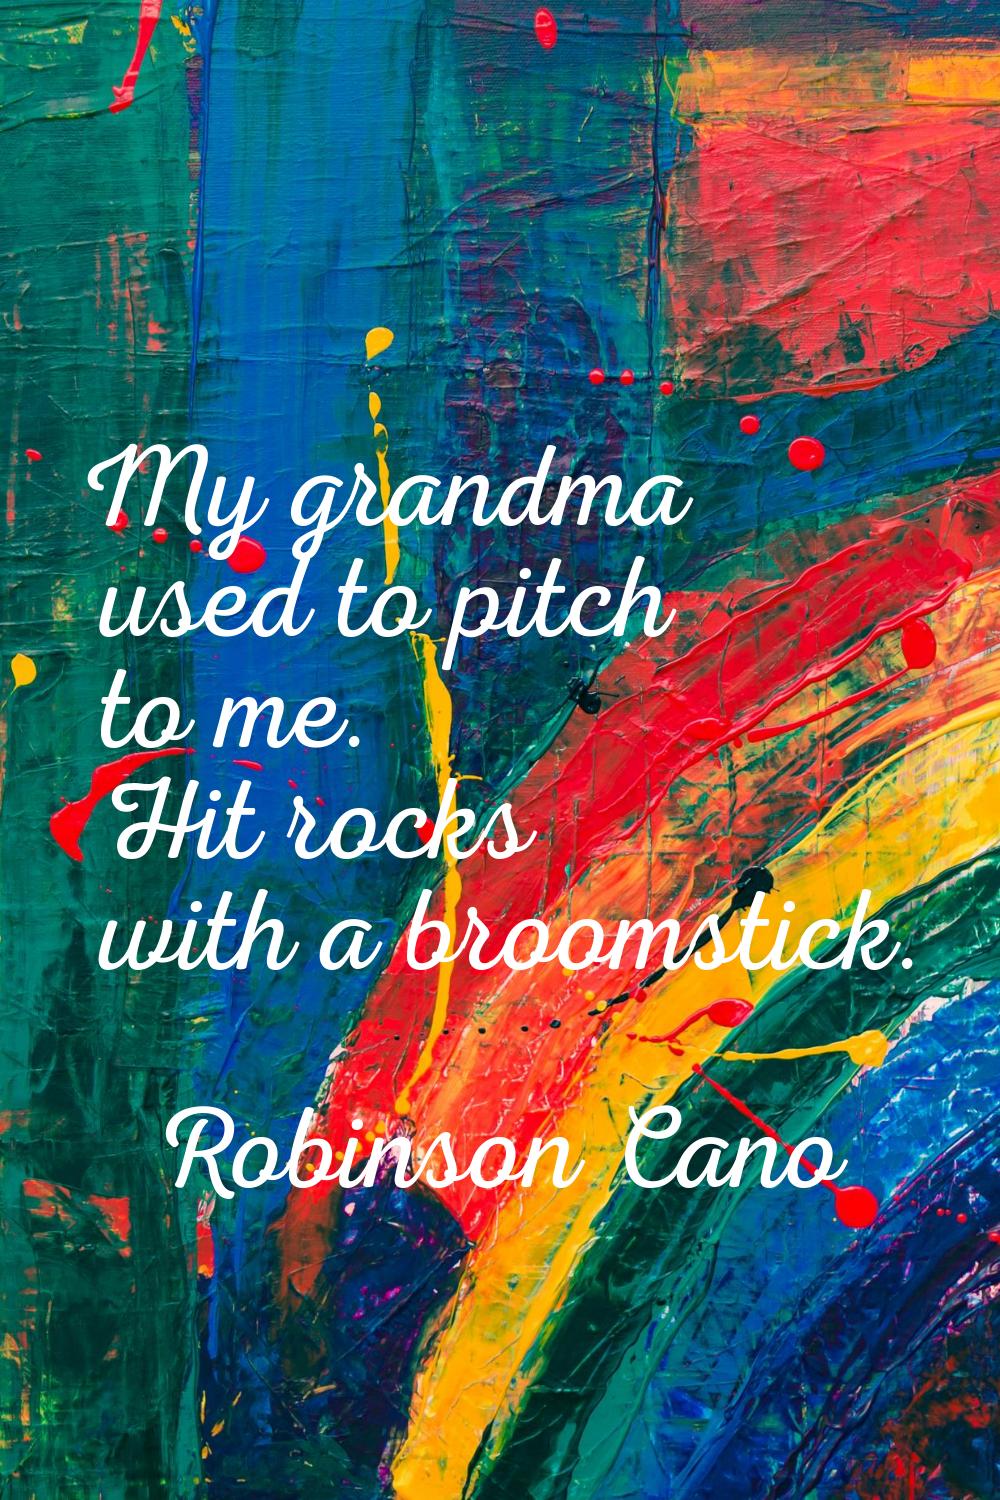 My grandma used to pitch to me. Hit rocks with a broomstick.